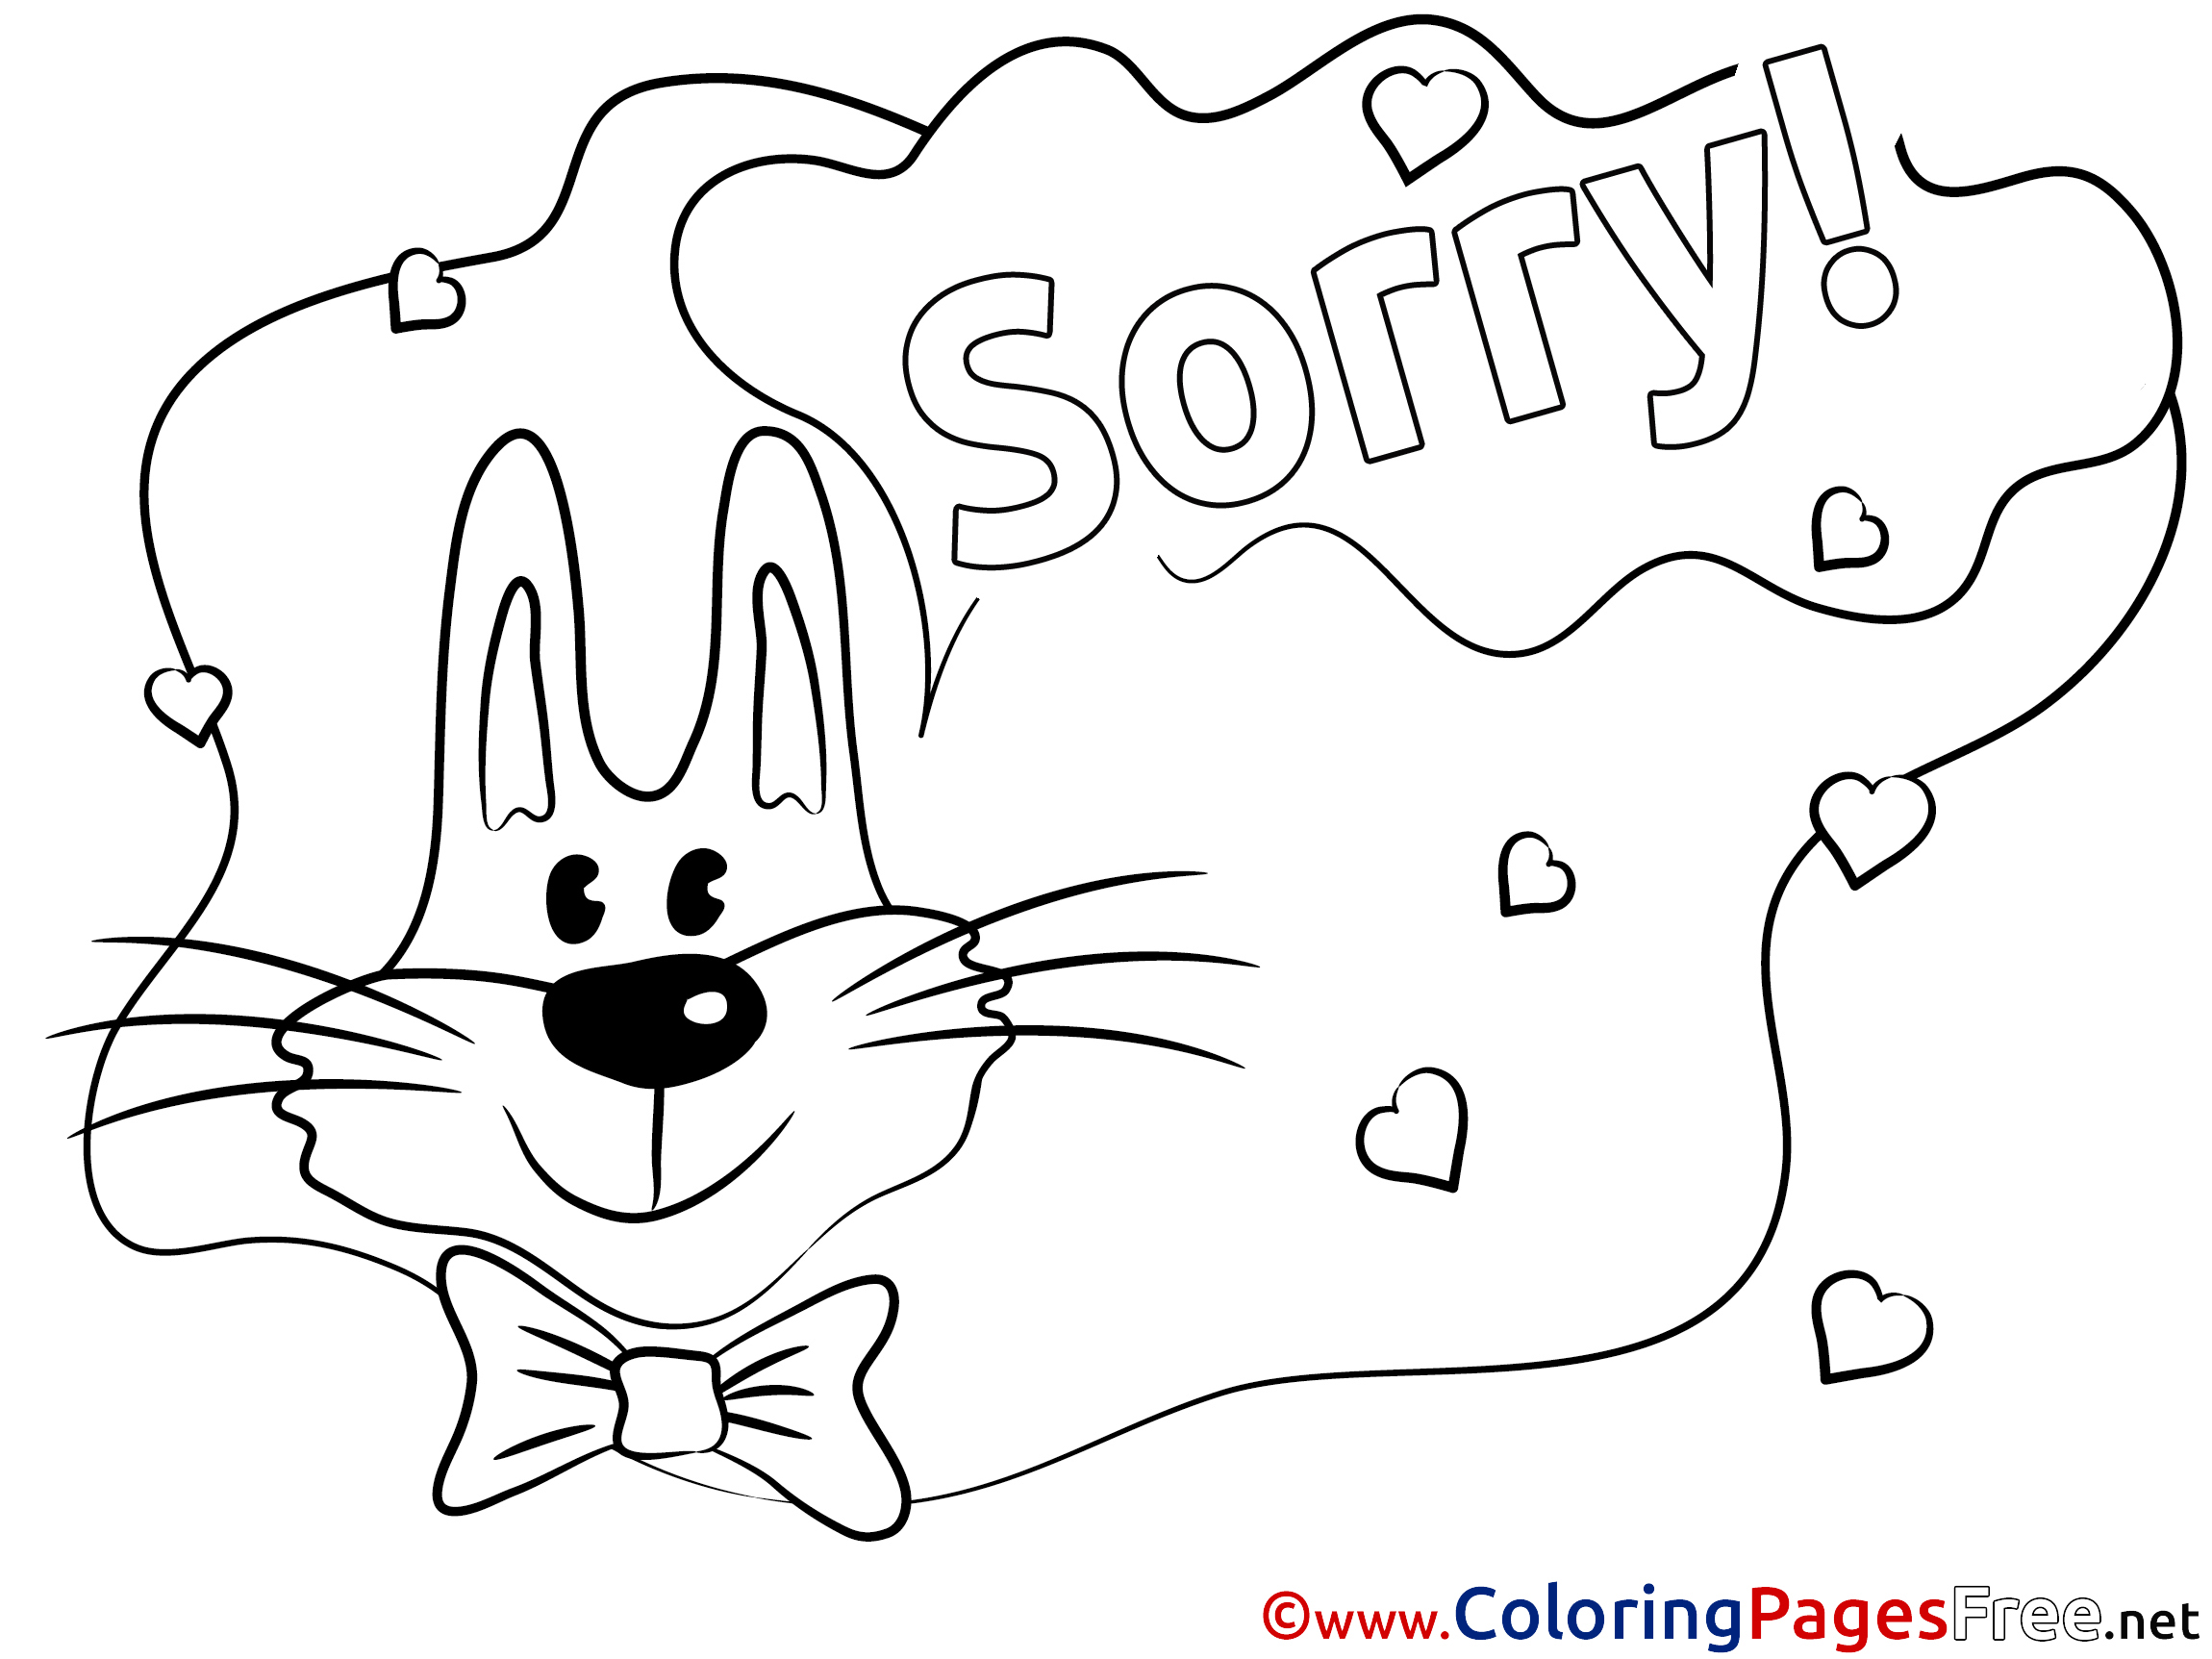 Apologetic Coloring Sheets 2